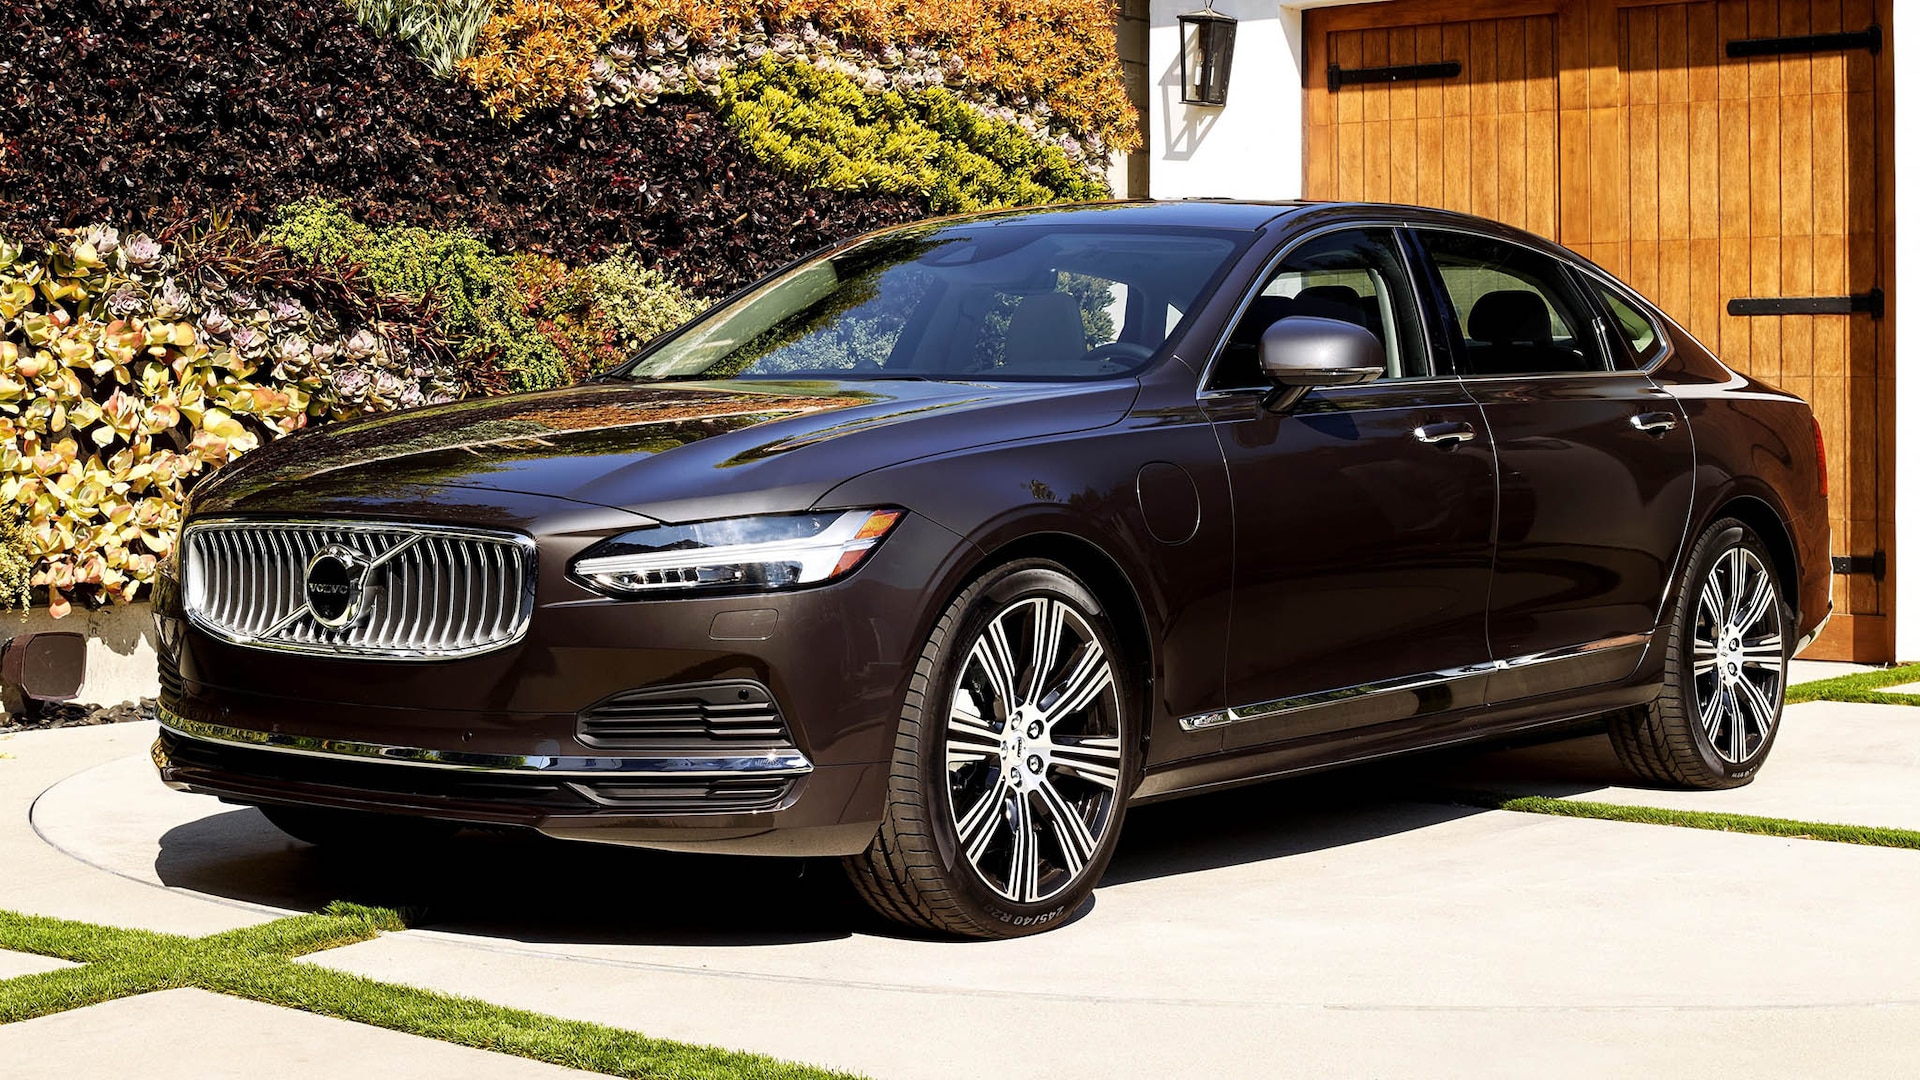 2022 Volvo S90 Prices, Reviews, and Photos - MotorTrend